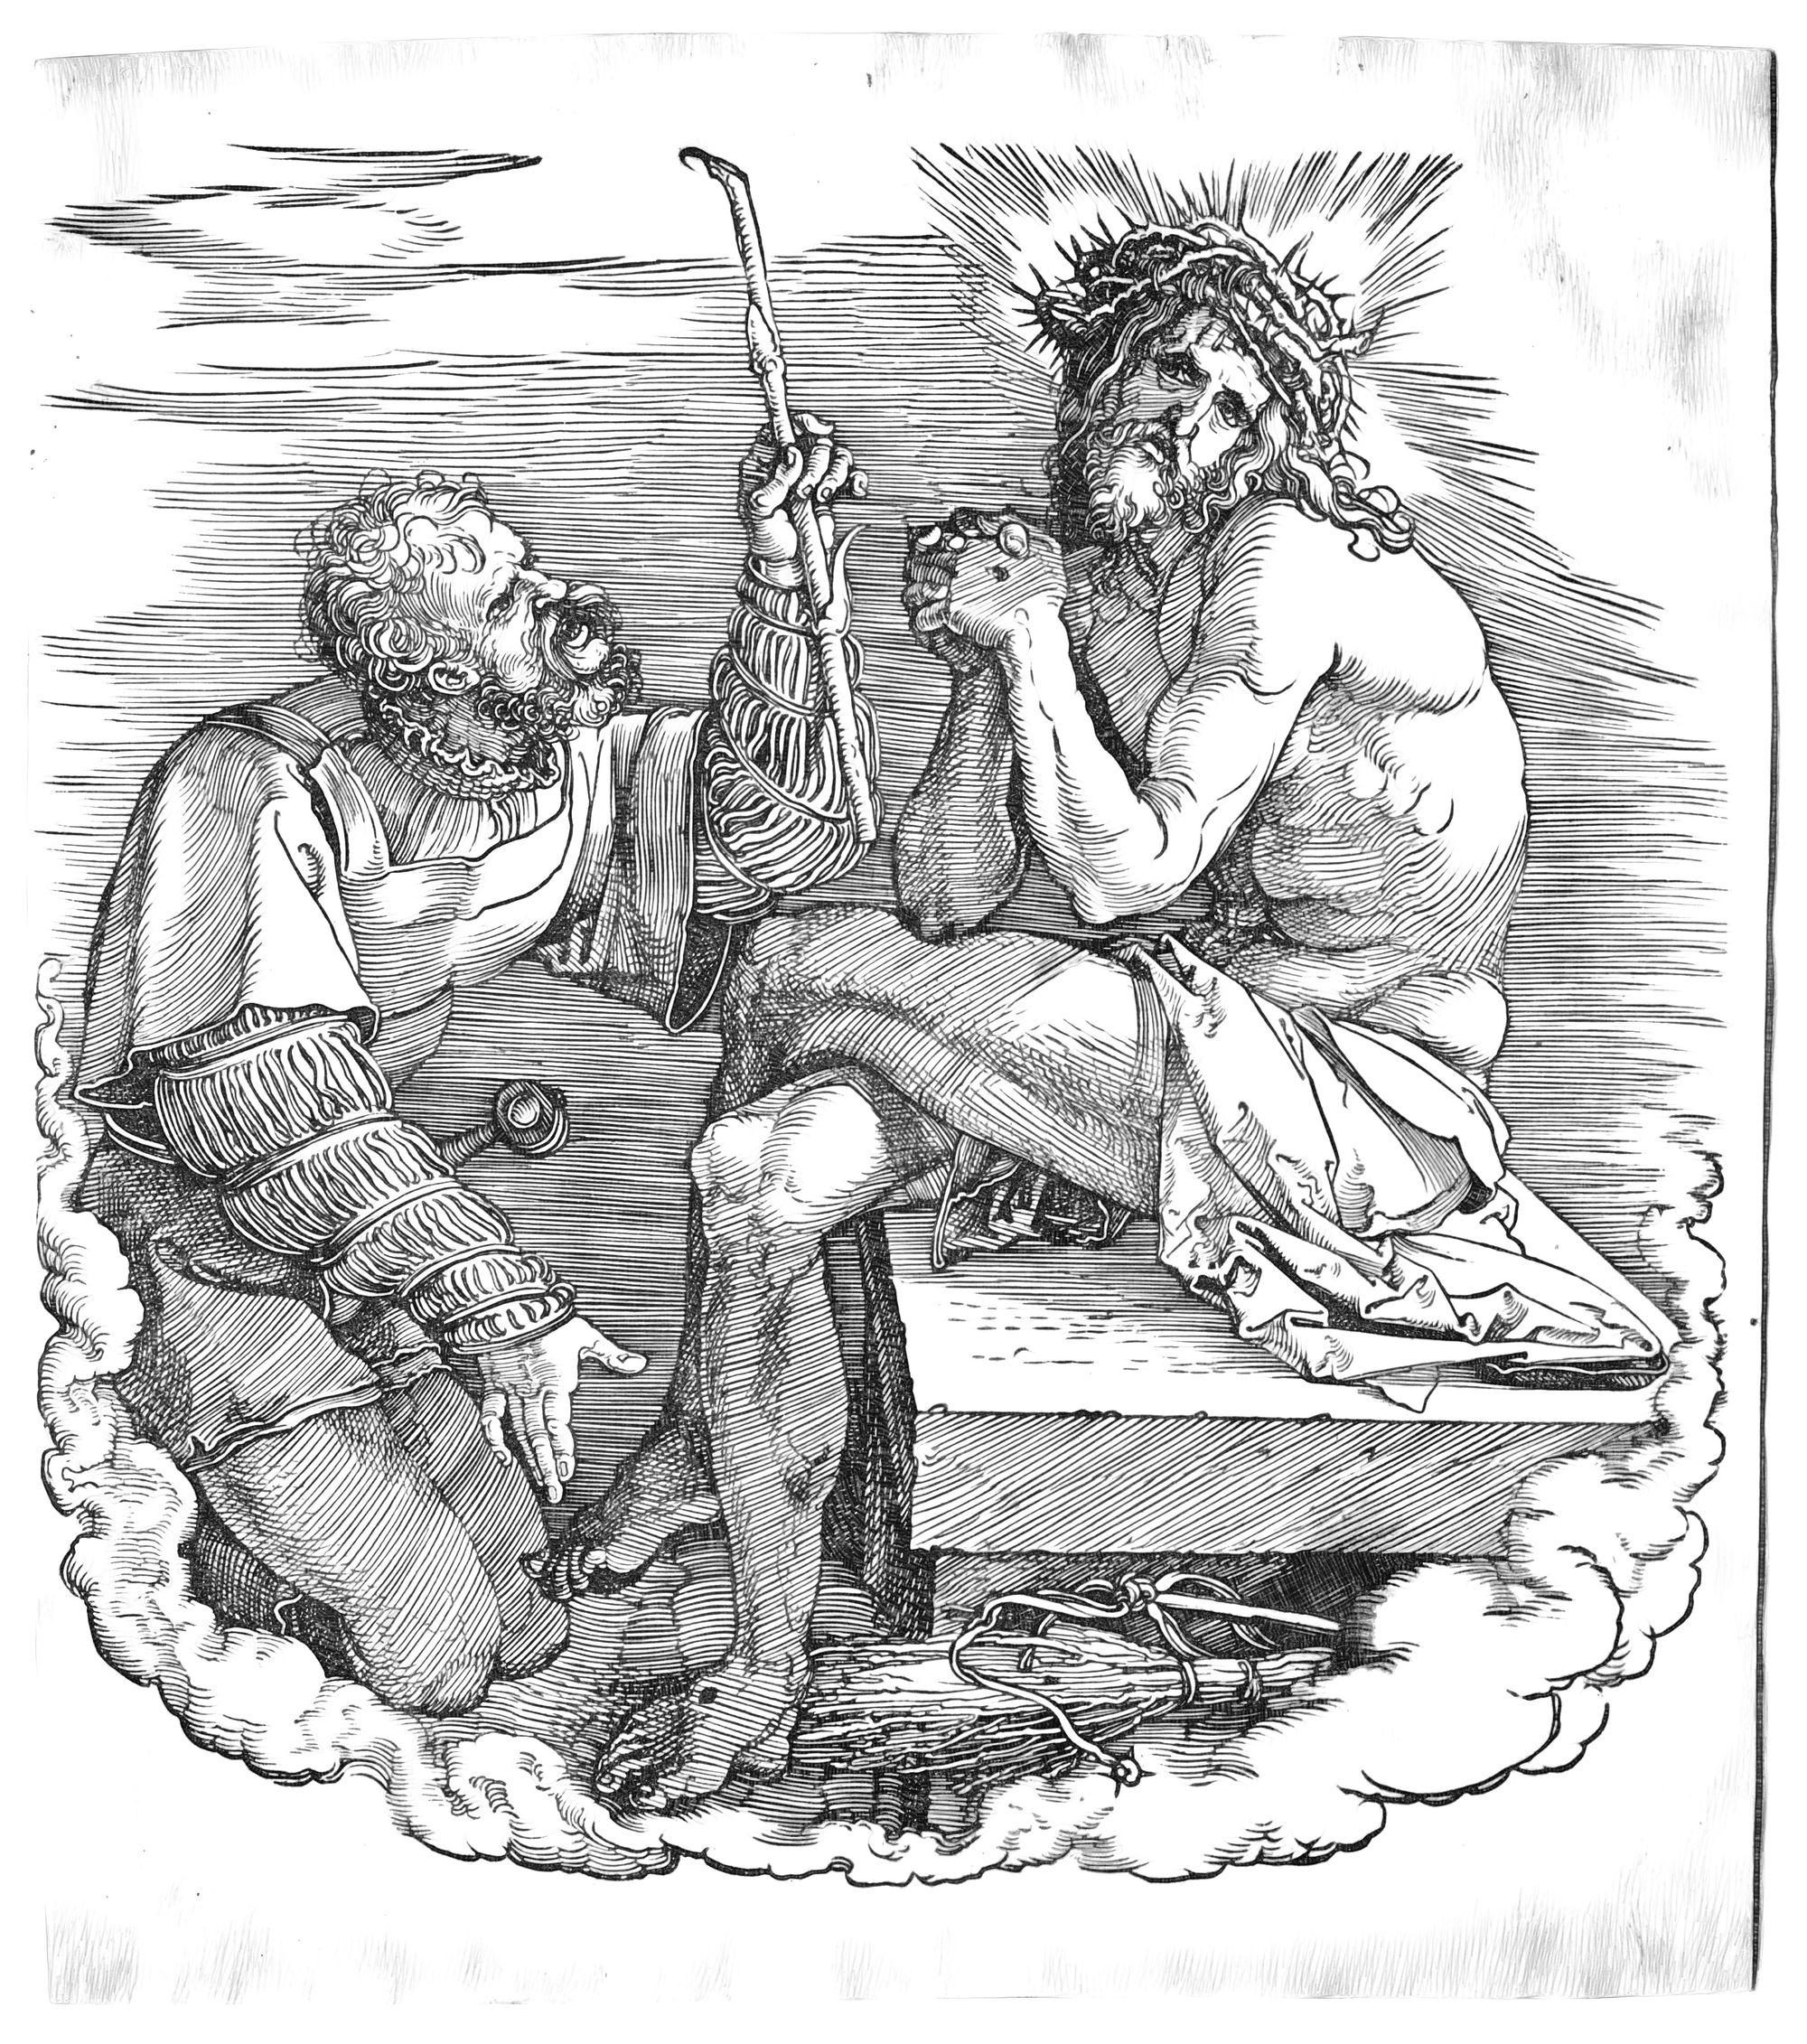 Christ, Man of Sorrows (16th Century) by Albrecht Dürer - Catholic Coloring Page